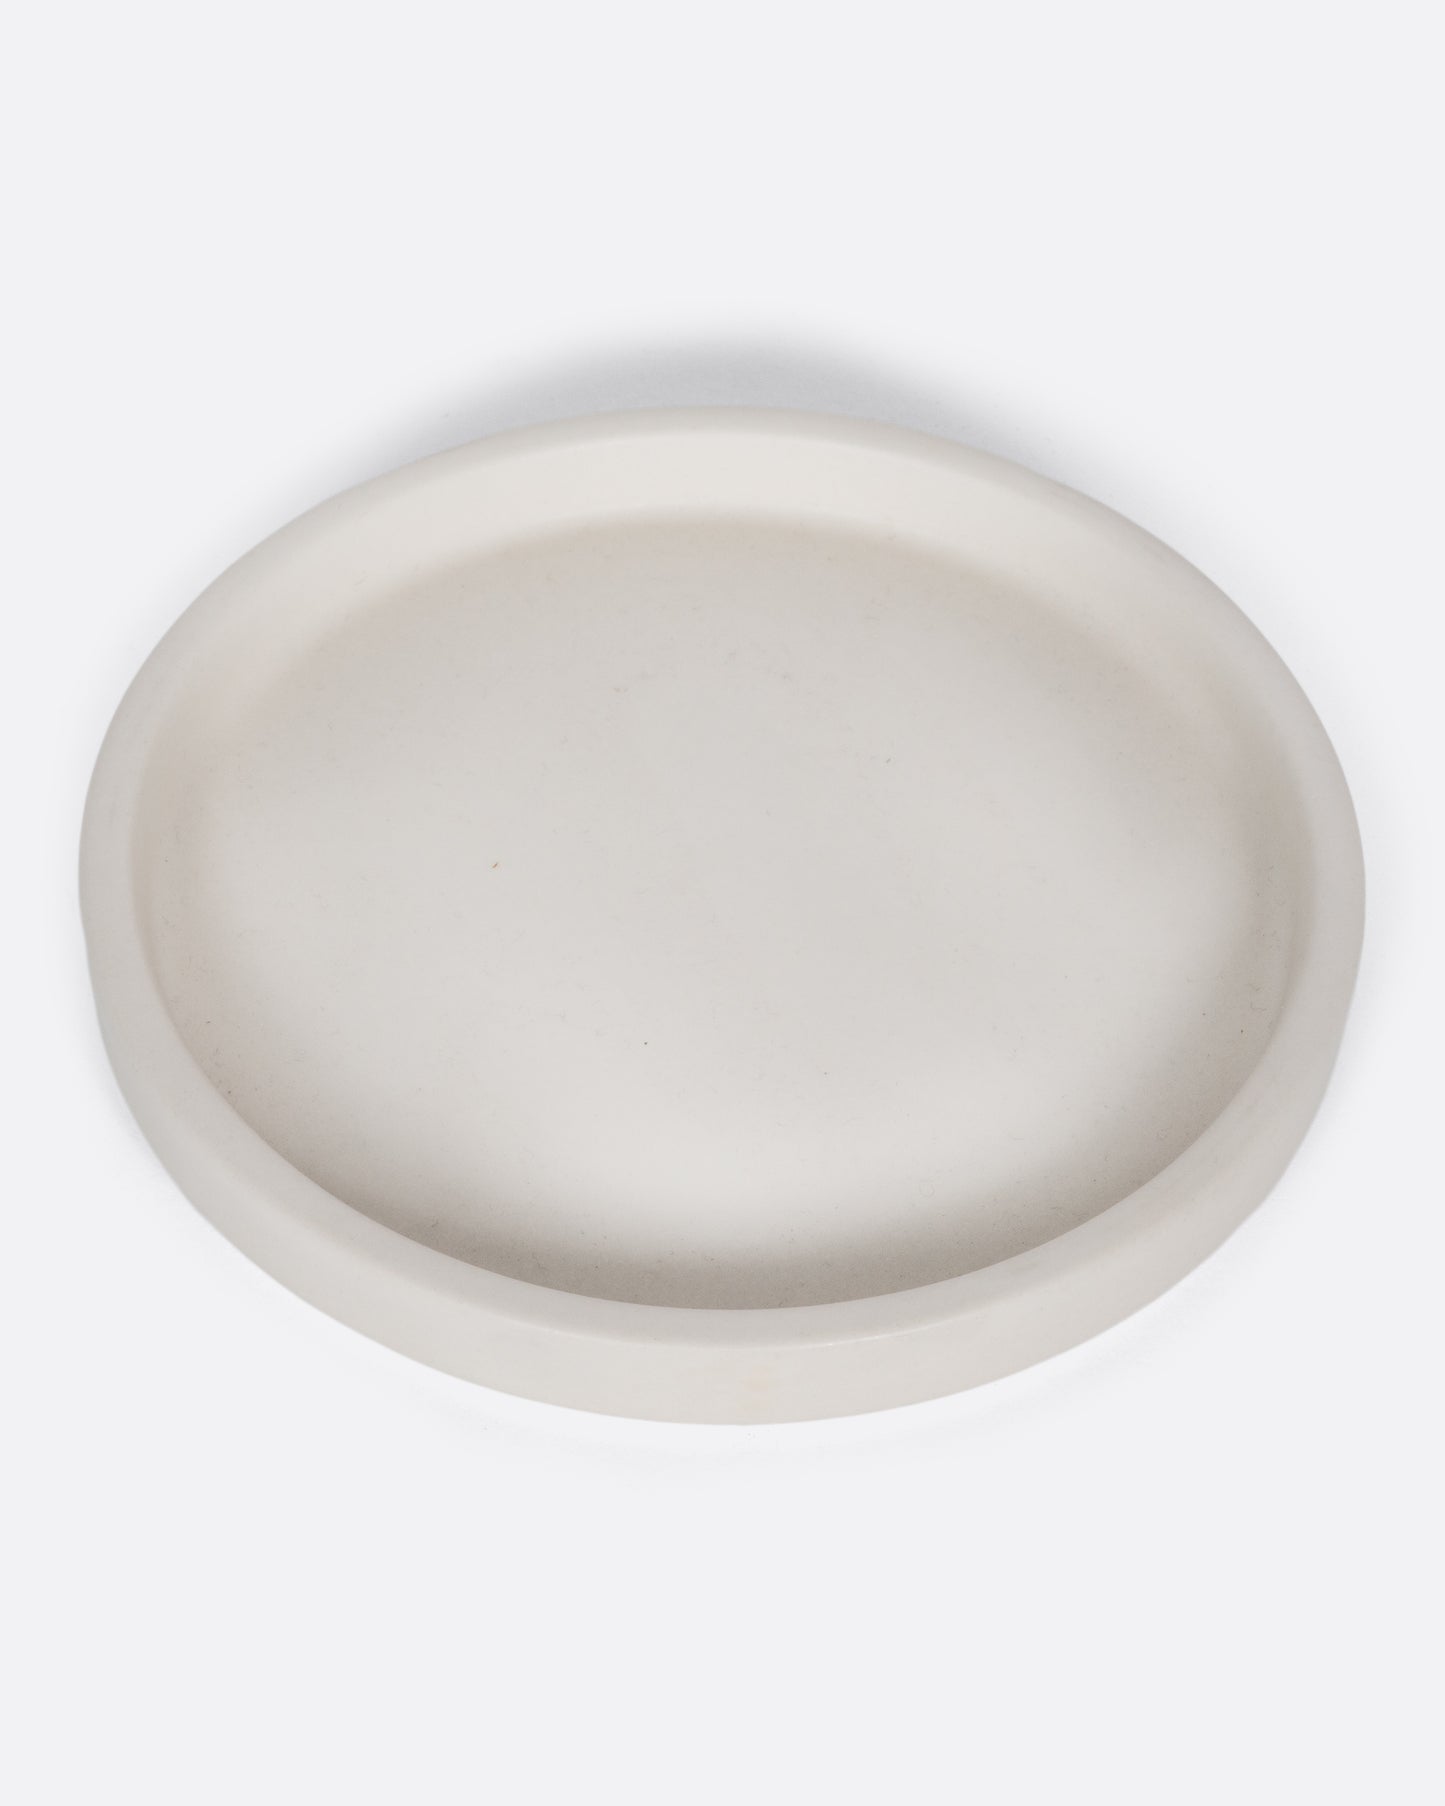 This creamy white ceramic plate with a raised lip and matte white finish looks beautiful with tall candles and works great for small plants, too.